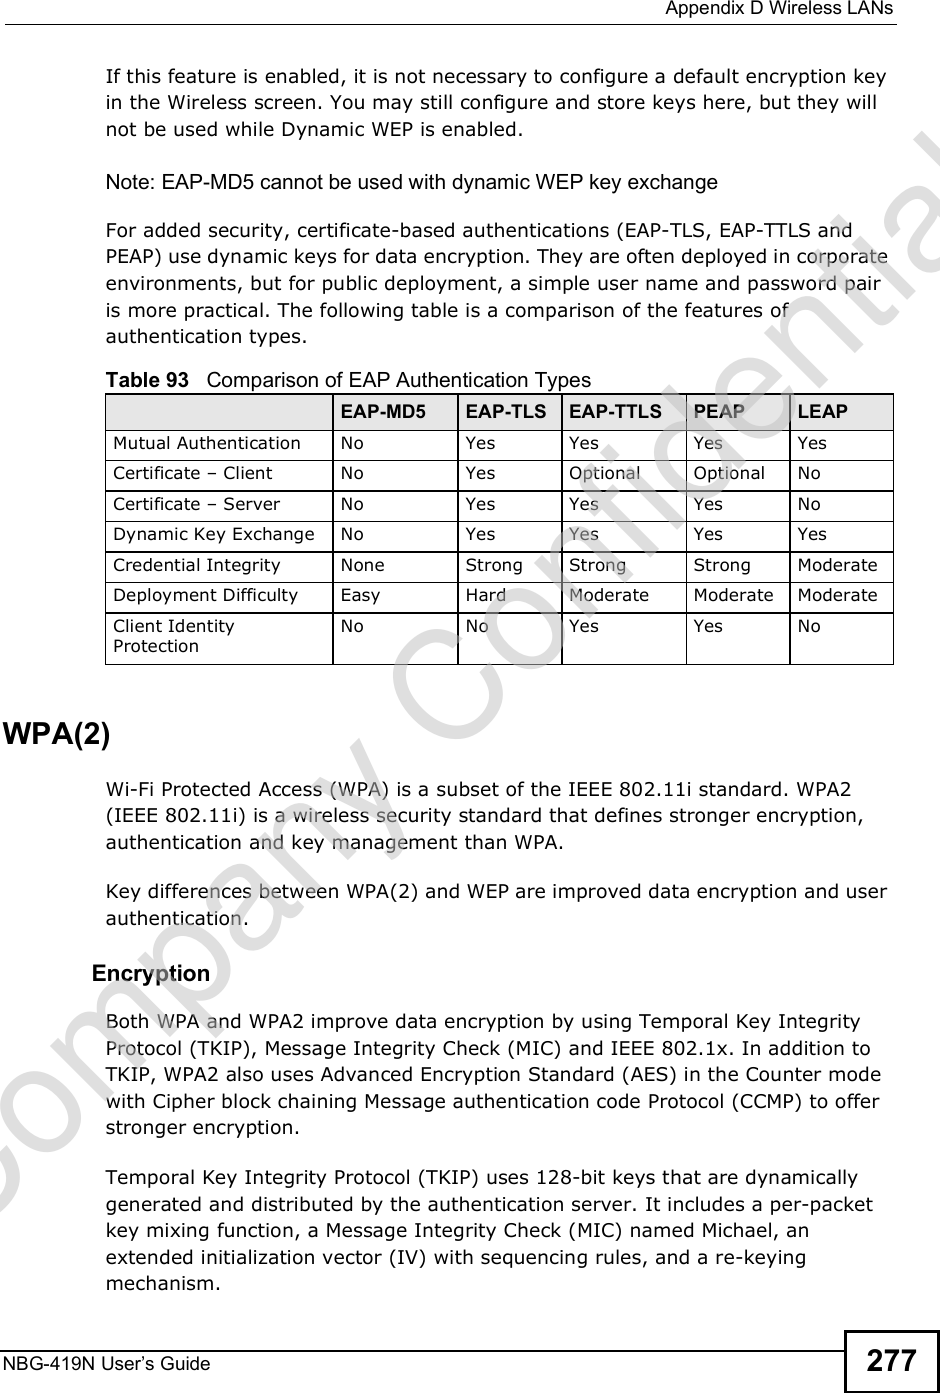  Appendix DWireless LANsNBG-419N User s Guide 277If this feature is enabled, it is not necessary to configure a default encryption key in the Wireless screen. You may still configure and store keys here, but they will not be used while Dynamic WEP is enabled.Note: EAP-MD5 cannot be used with dynamic WEP key exchangeFor added security, certificate-based authentications (EAP-TLS, EAP-TTLS and PEAP) use dynamic keys for data encryption. They are often deployed in corporate environments, but for public deployment, a simple user name and password pair is more practical. The following table is a comparison of the features of authentication types.WPA(2)Wi-Fi Protected Access (WPA) is a subset of the IEEE 802.11i standard. WPA2 (IEEE 802.11i) is a wireless security standard that defines stronger encryption, authentication and key management than WPA. Key differences between WPA(2) and WEP are improved data encryption and user authentication.              EncryptionBoth WPA and WPA2 improve data encryption by using Temporal Key Integrity Protocol (TKIP), Message Integrity Check (MIC) and IEEE 802.1x. In addition to TKIP, WPA2 also uses Advanced Encryption Standard (AES) in the Counter mode with Cipher block chaining Message authentication code Protocol (CCMP) to offer stronger encryption. Temporal Key Integrity Protocol (TKIP) uses 128-bit keys that are dynamically generated and distributed by the authentication server. It includes a per-packet key mixing function, a Message Integrity Check (MIC) named Michael, an extended initialization vector (IV) with sequencing rules, and a re-keying mechanism.Table 93   Comparison of EAP Authentication TypesEAP-MD5 EAP-TLS EAP-TTLS PEAP LEAPMutual Authentication No Yes Yes Yes YesCertificate $ Client No Yes Optional Optional NoCertificate $ Server No Yes Yes Yes NoDynamic Key Exchange No Yes Yes Yes YesCredential Integrity None Strong Strong Strong ModerateDeployment Difficulty Easy Hard Moderate Moderate ModerateClient Identity ProtectionNo No Yes Yes NoCompany Confidential